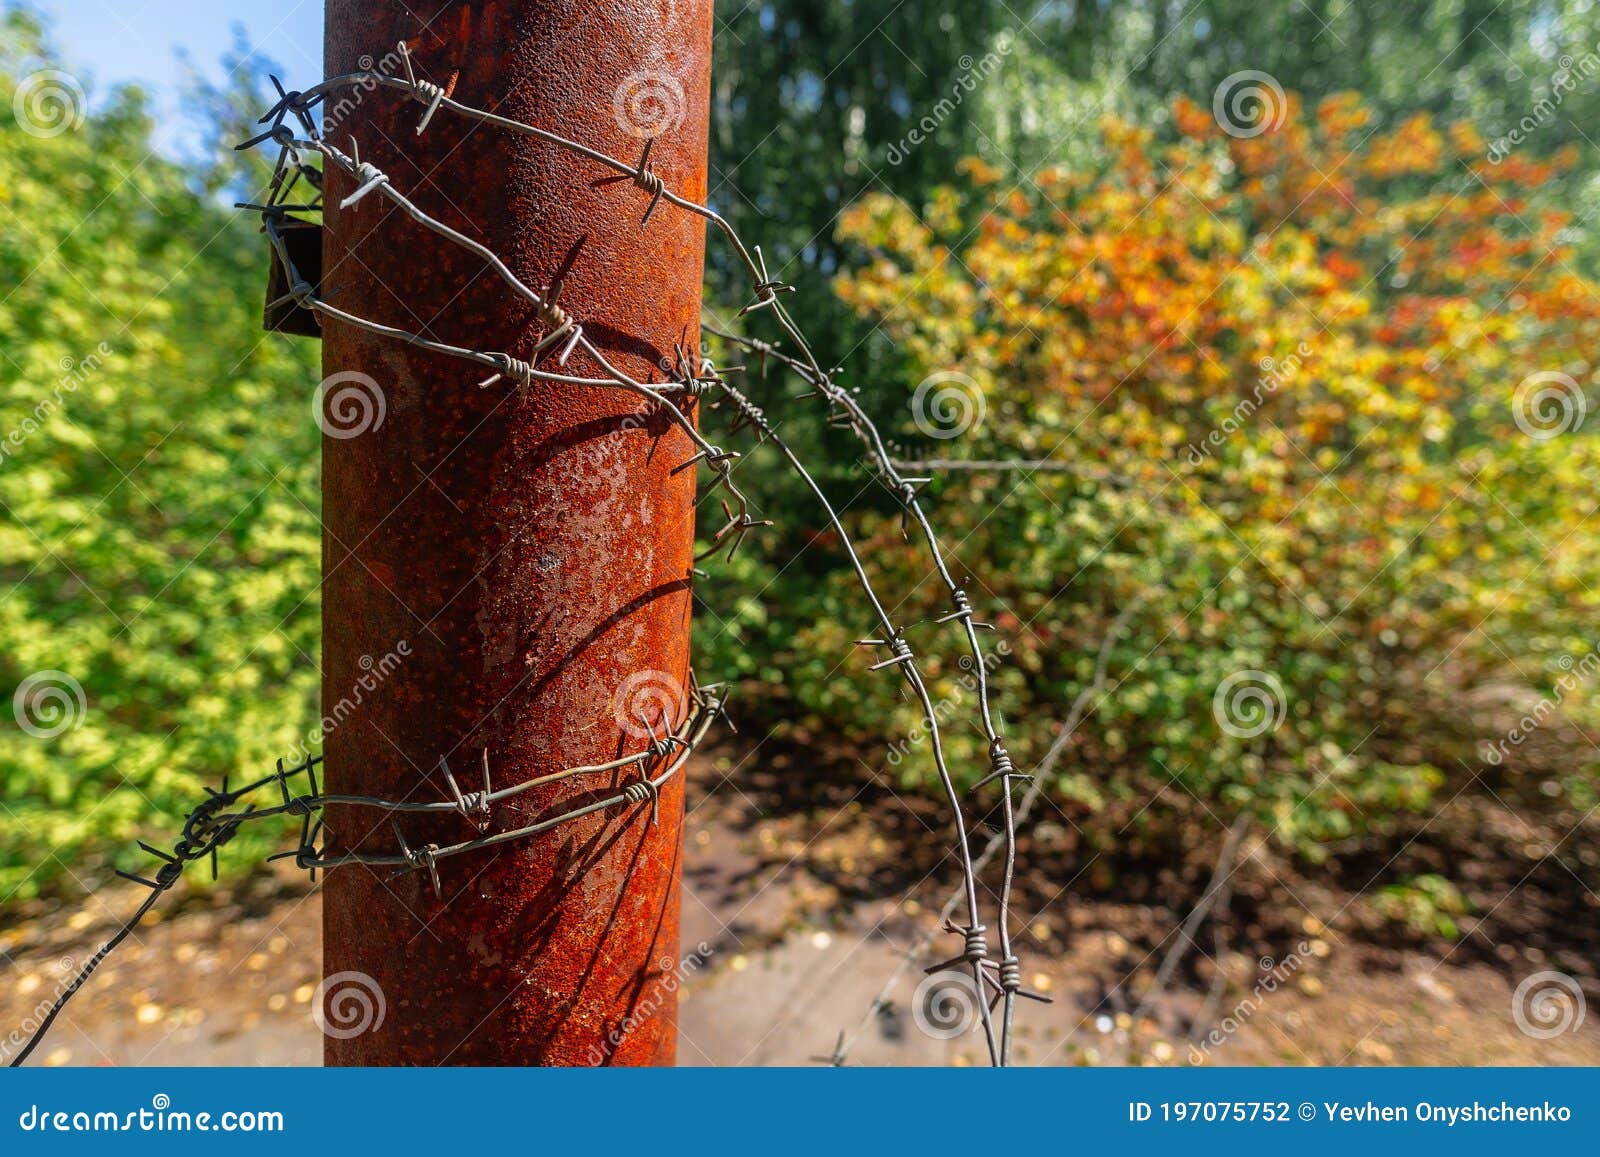 rusty barbed wire on rusty post in ghost town pripyat chornobyl zone